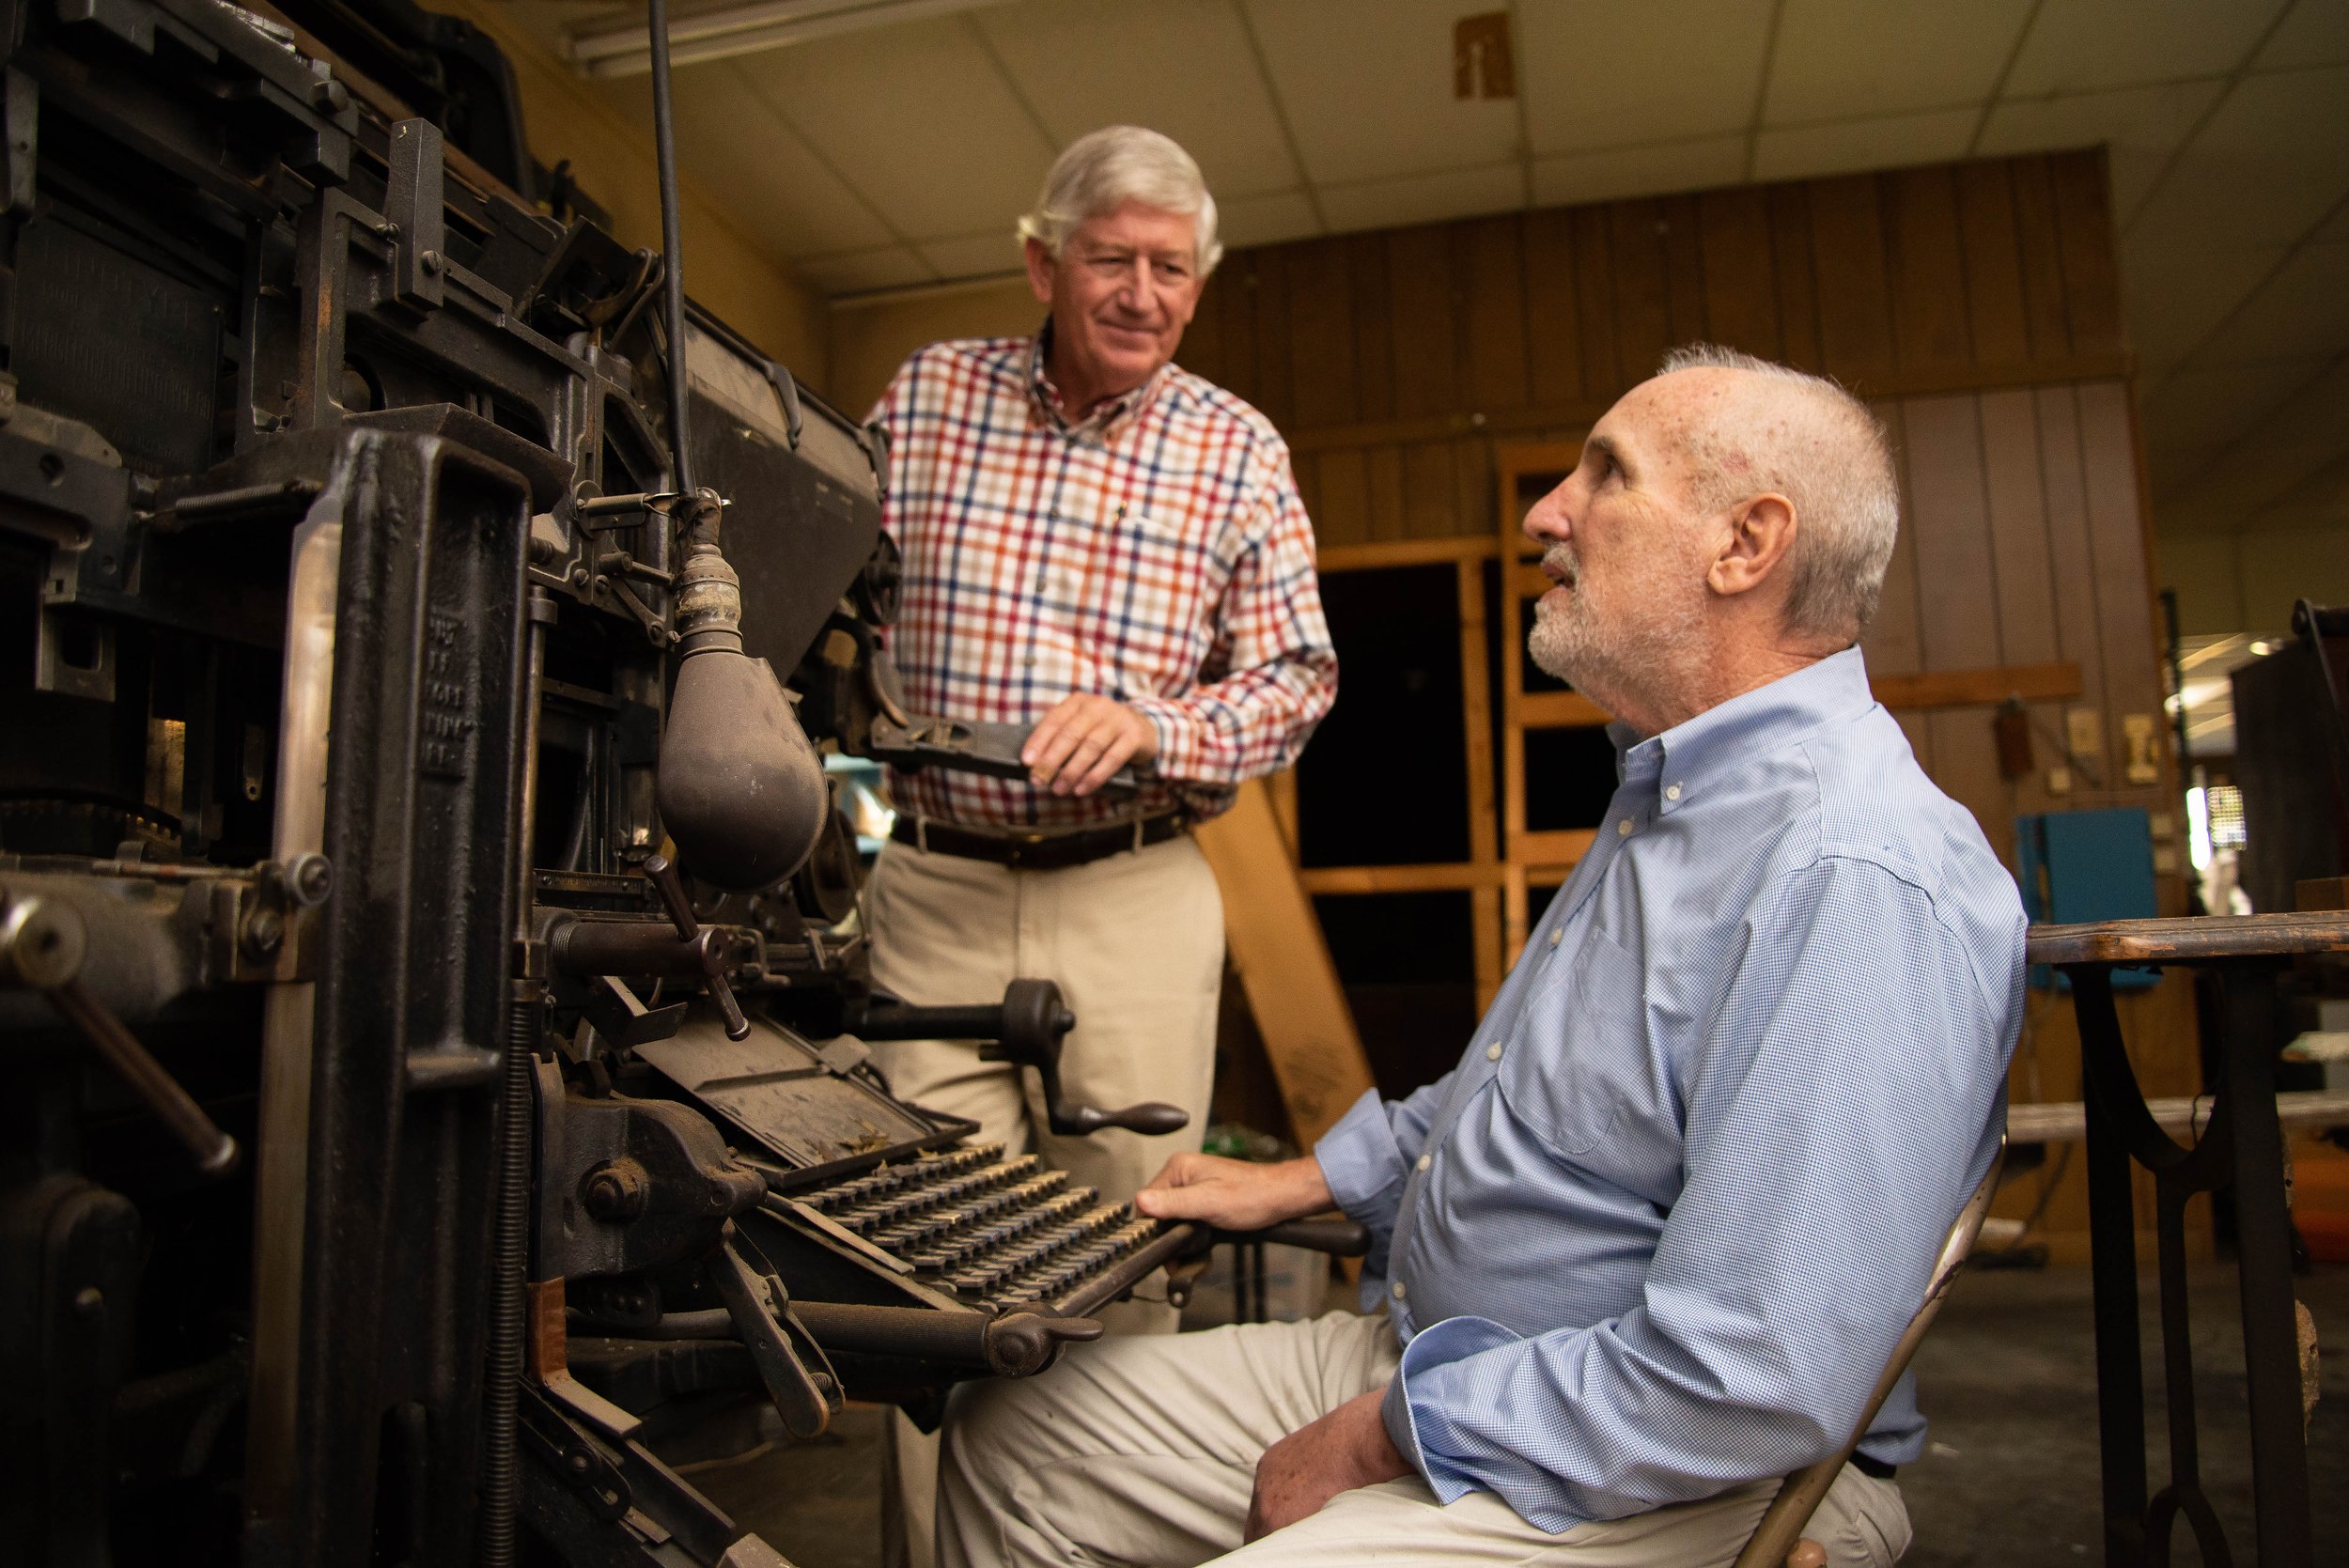  Oglethorpe Echo editor and publisher Ralph Maxwell sits at a vintage linotype machine while visiting with Dink NeSmith at The Echo’s office on Tuesday, Oct. 21, 2021 in Lexington, Georgia. NeSmith stepped in to save the paper when Maxwell announced 